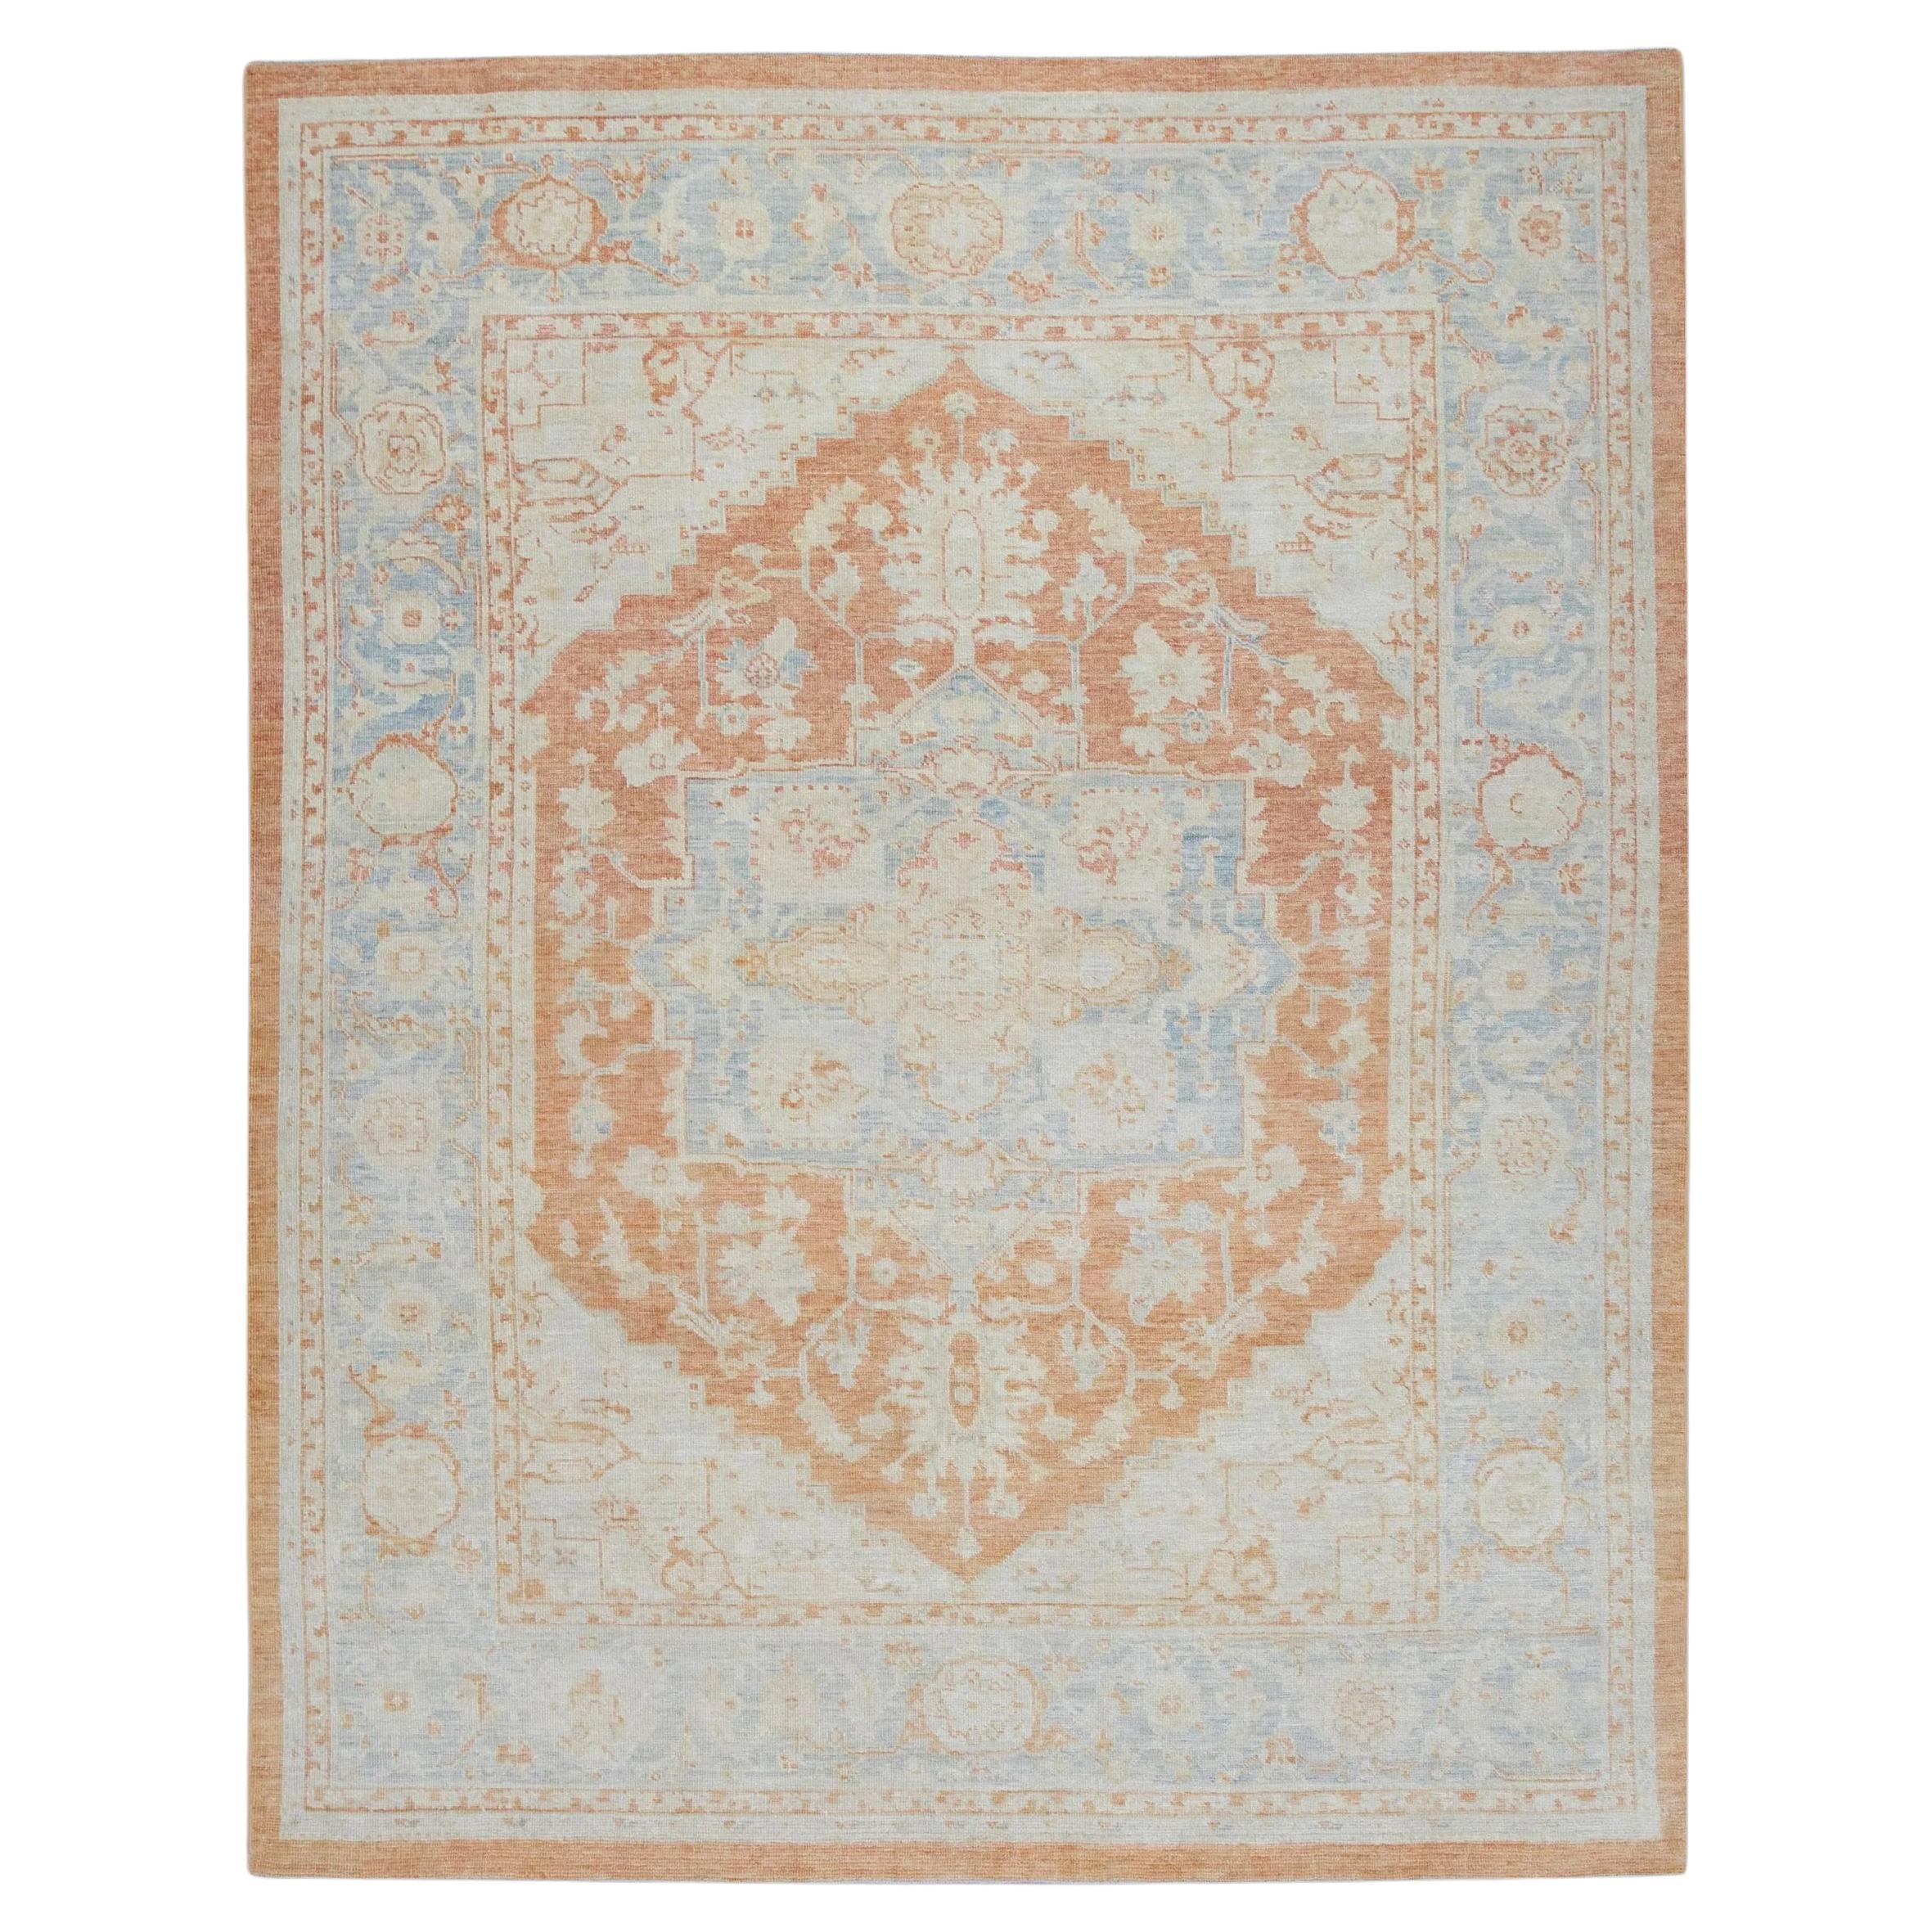 Floral Turkish Finewoven Wool Oushak Rug in Salmon Pink and Baby Blue 6'2" x 8'